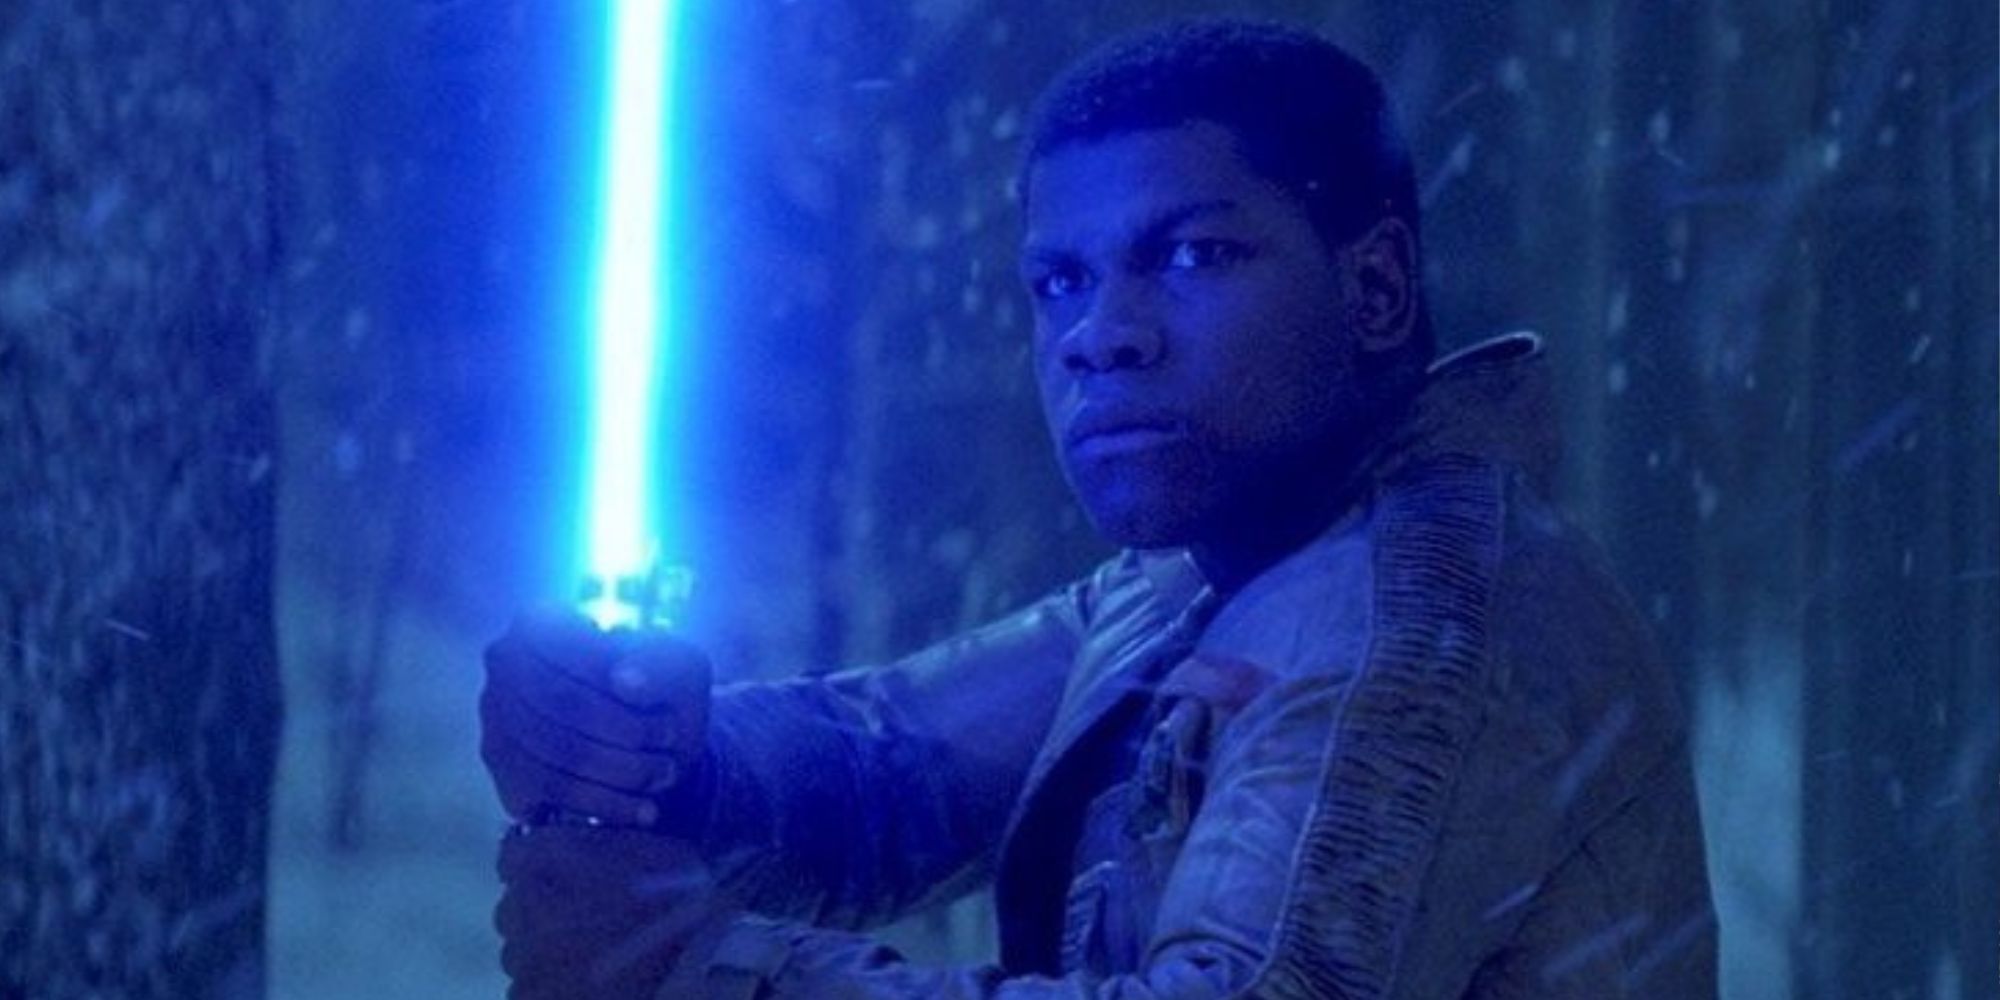 Star Wars Fans Want Disney To Do Finn Right And Finally Make Him A Jedi